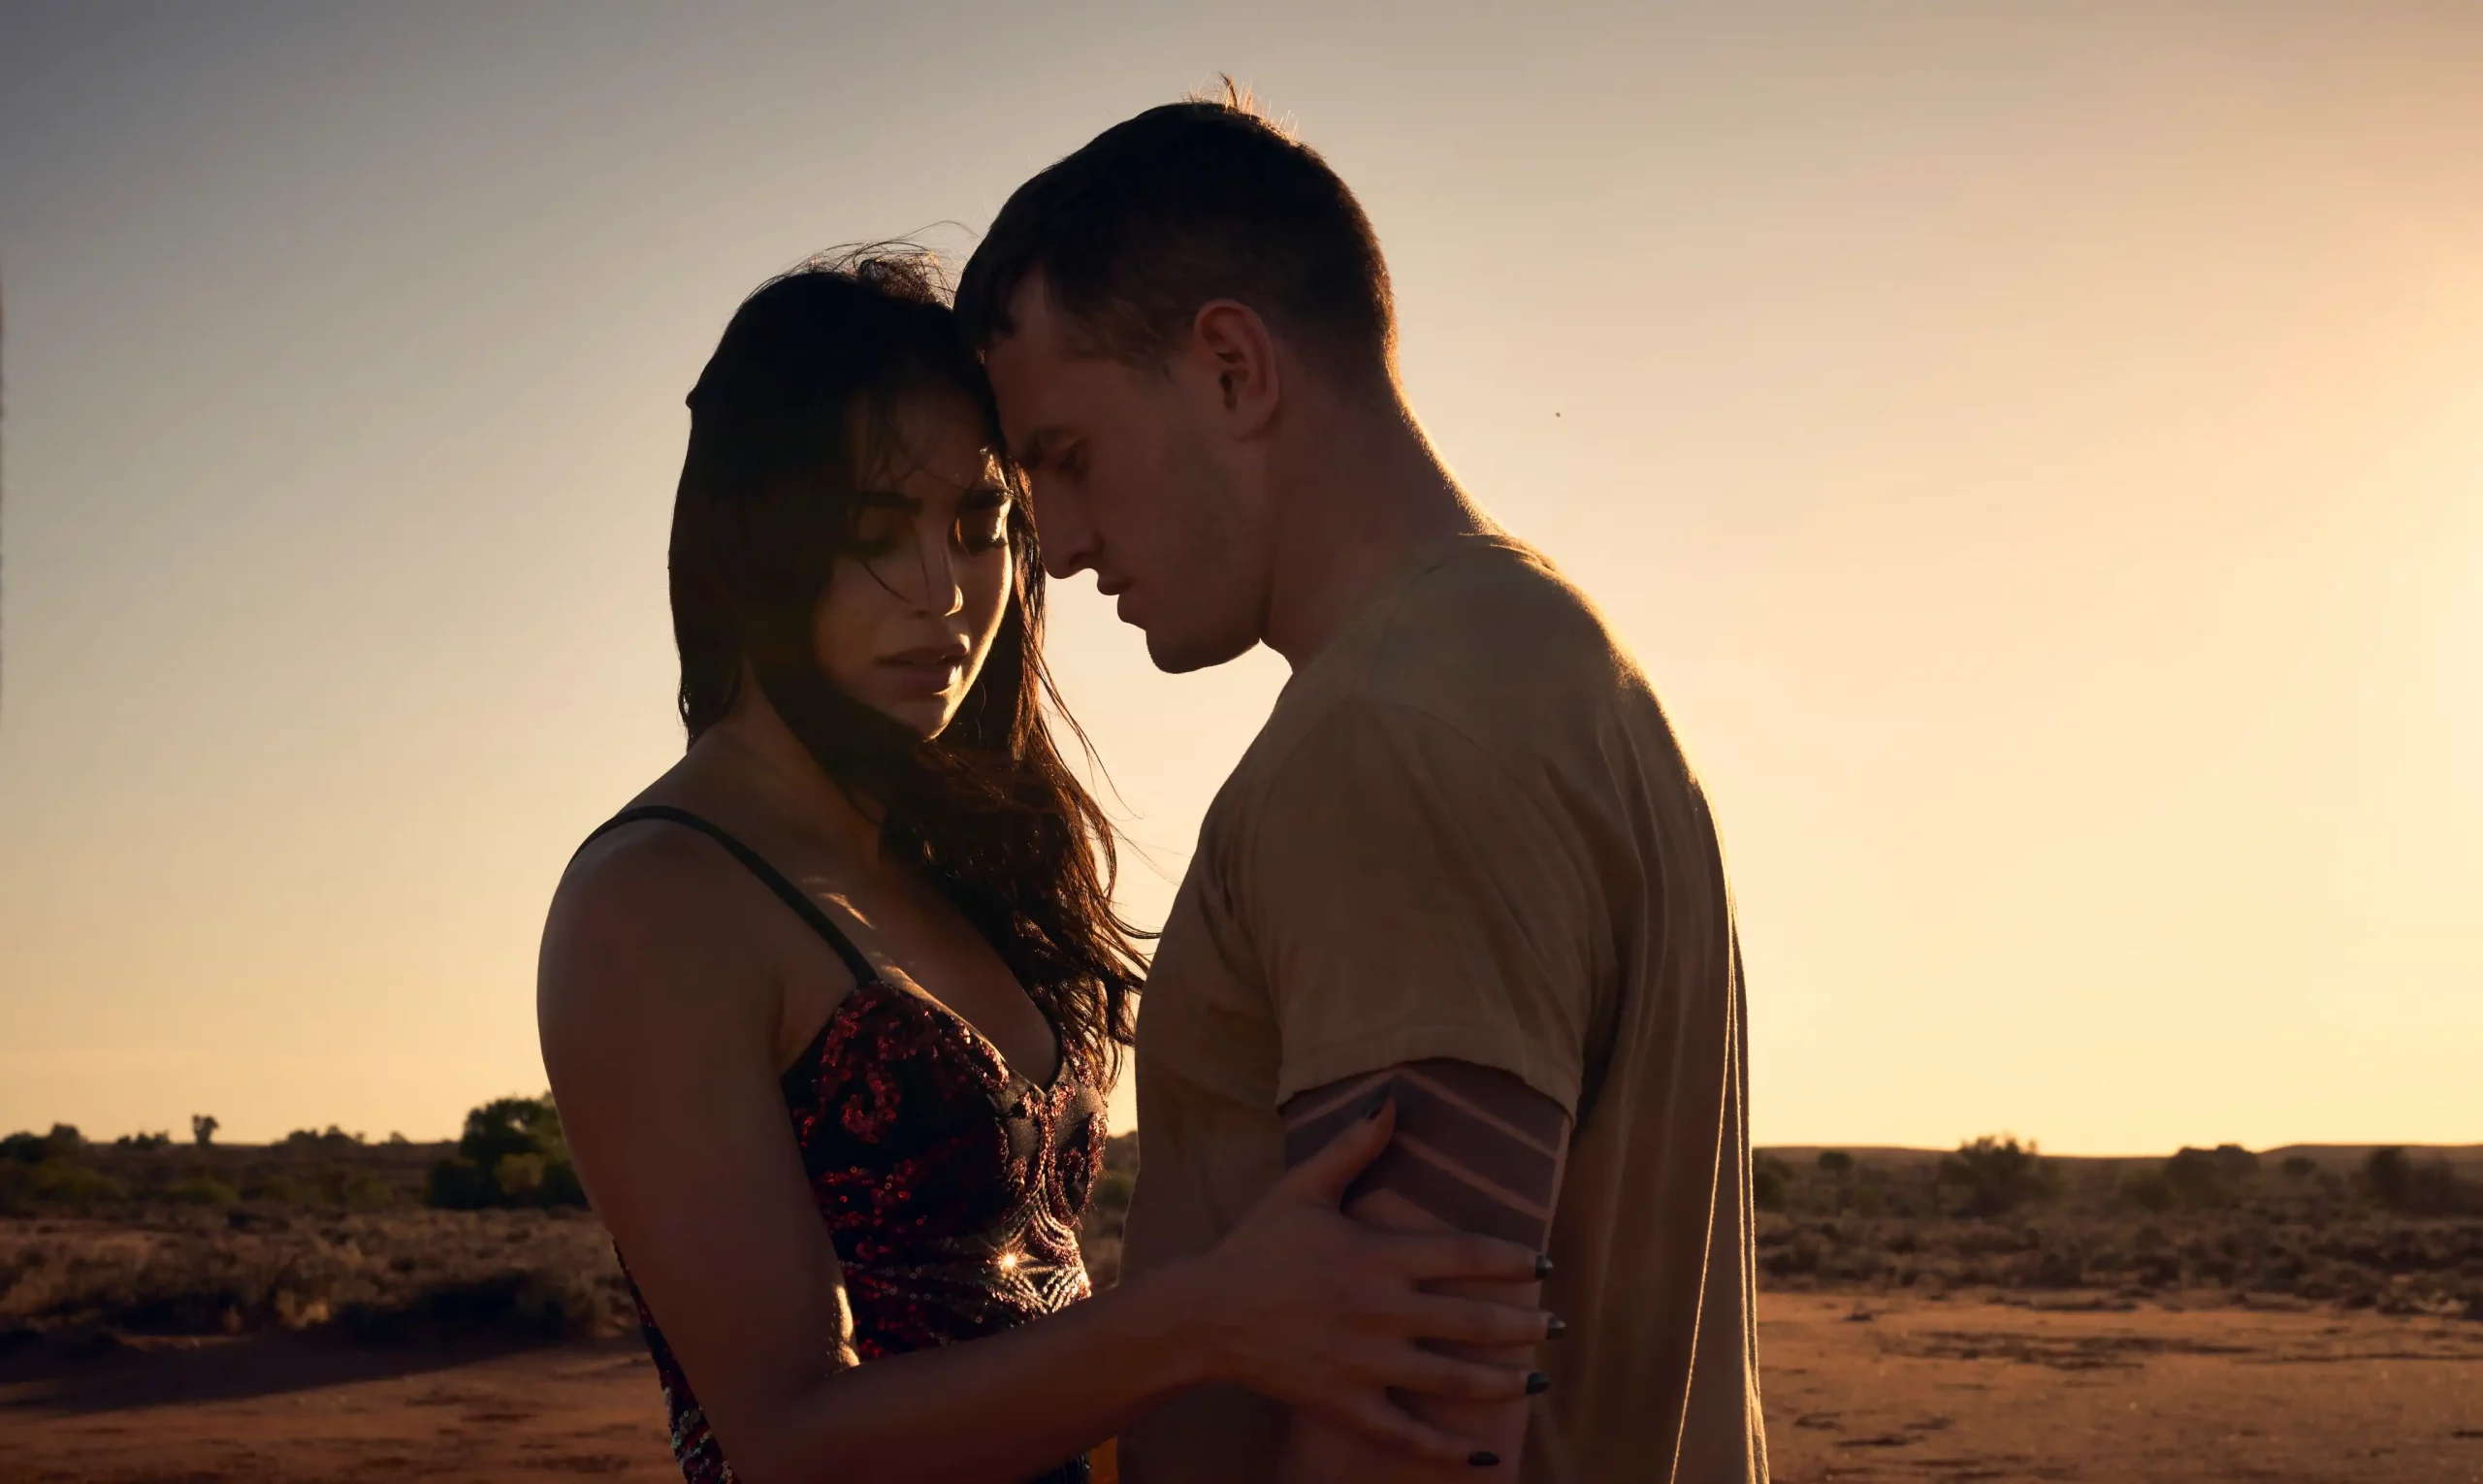 The two leads of Carmen stand close to one another in a desert environment.